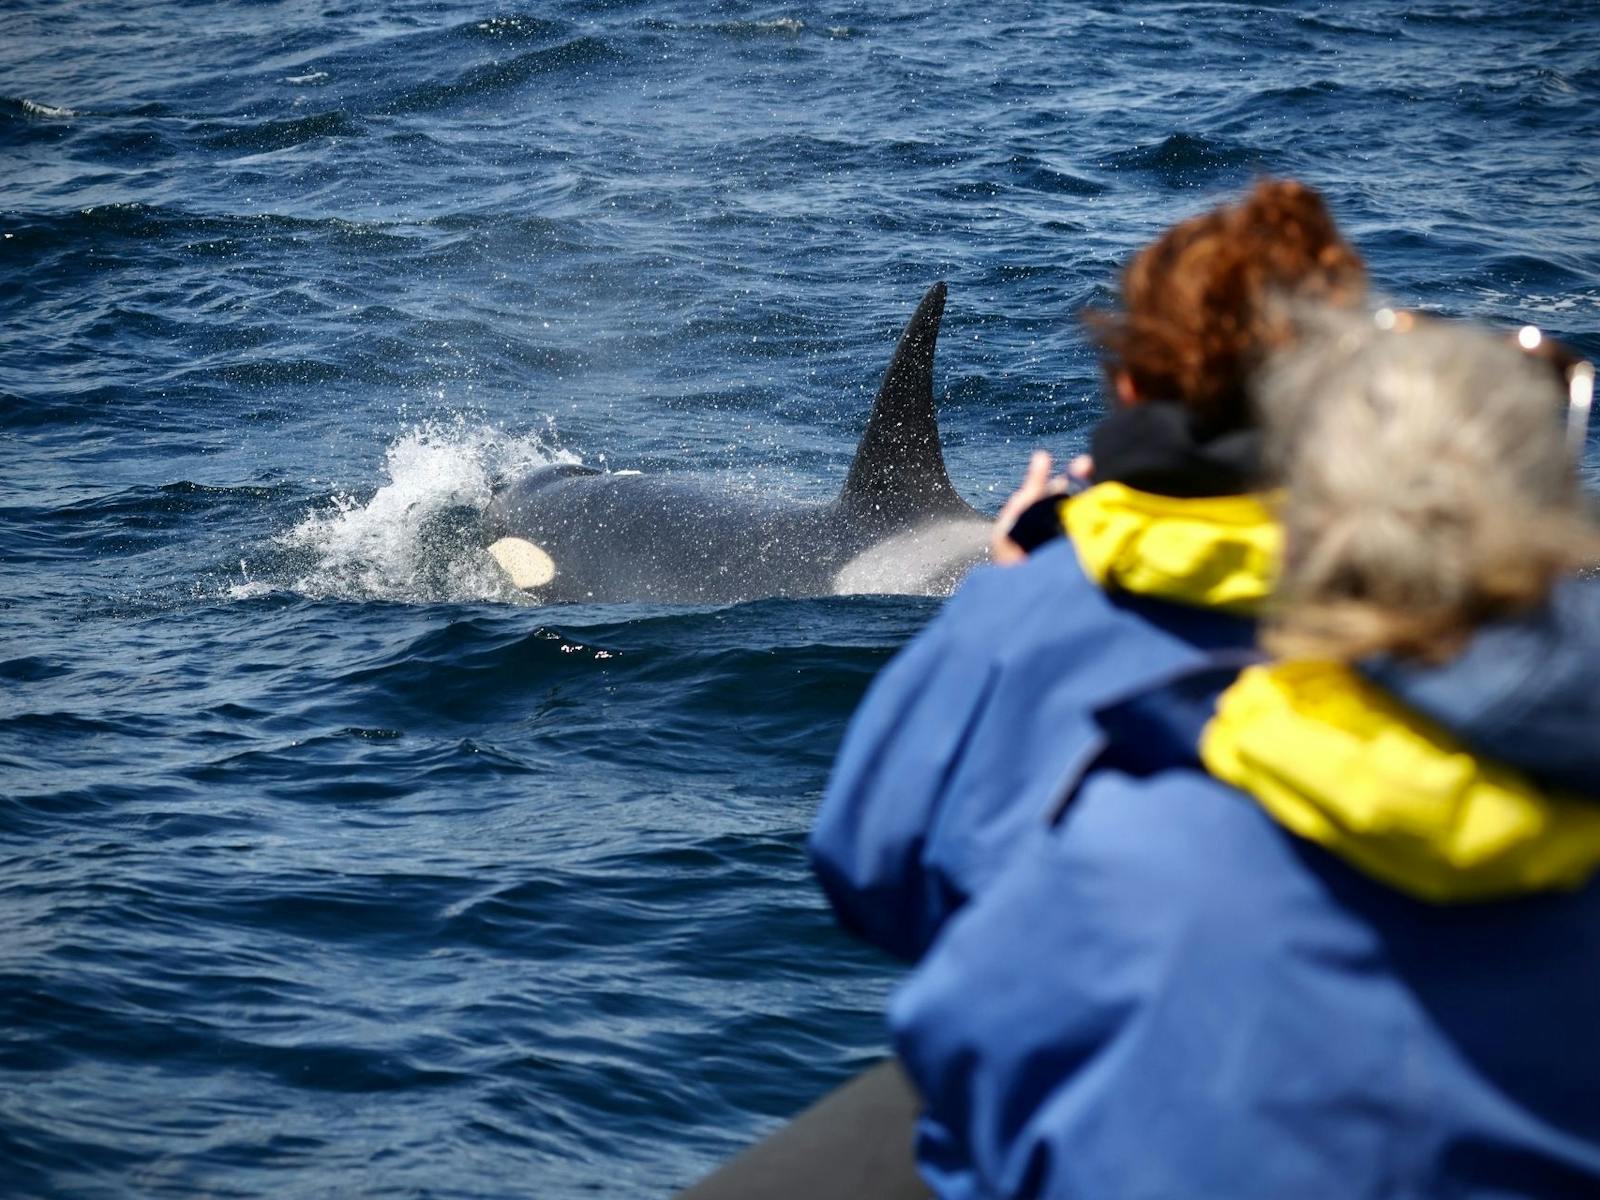 Watching Orcas from the boat